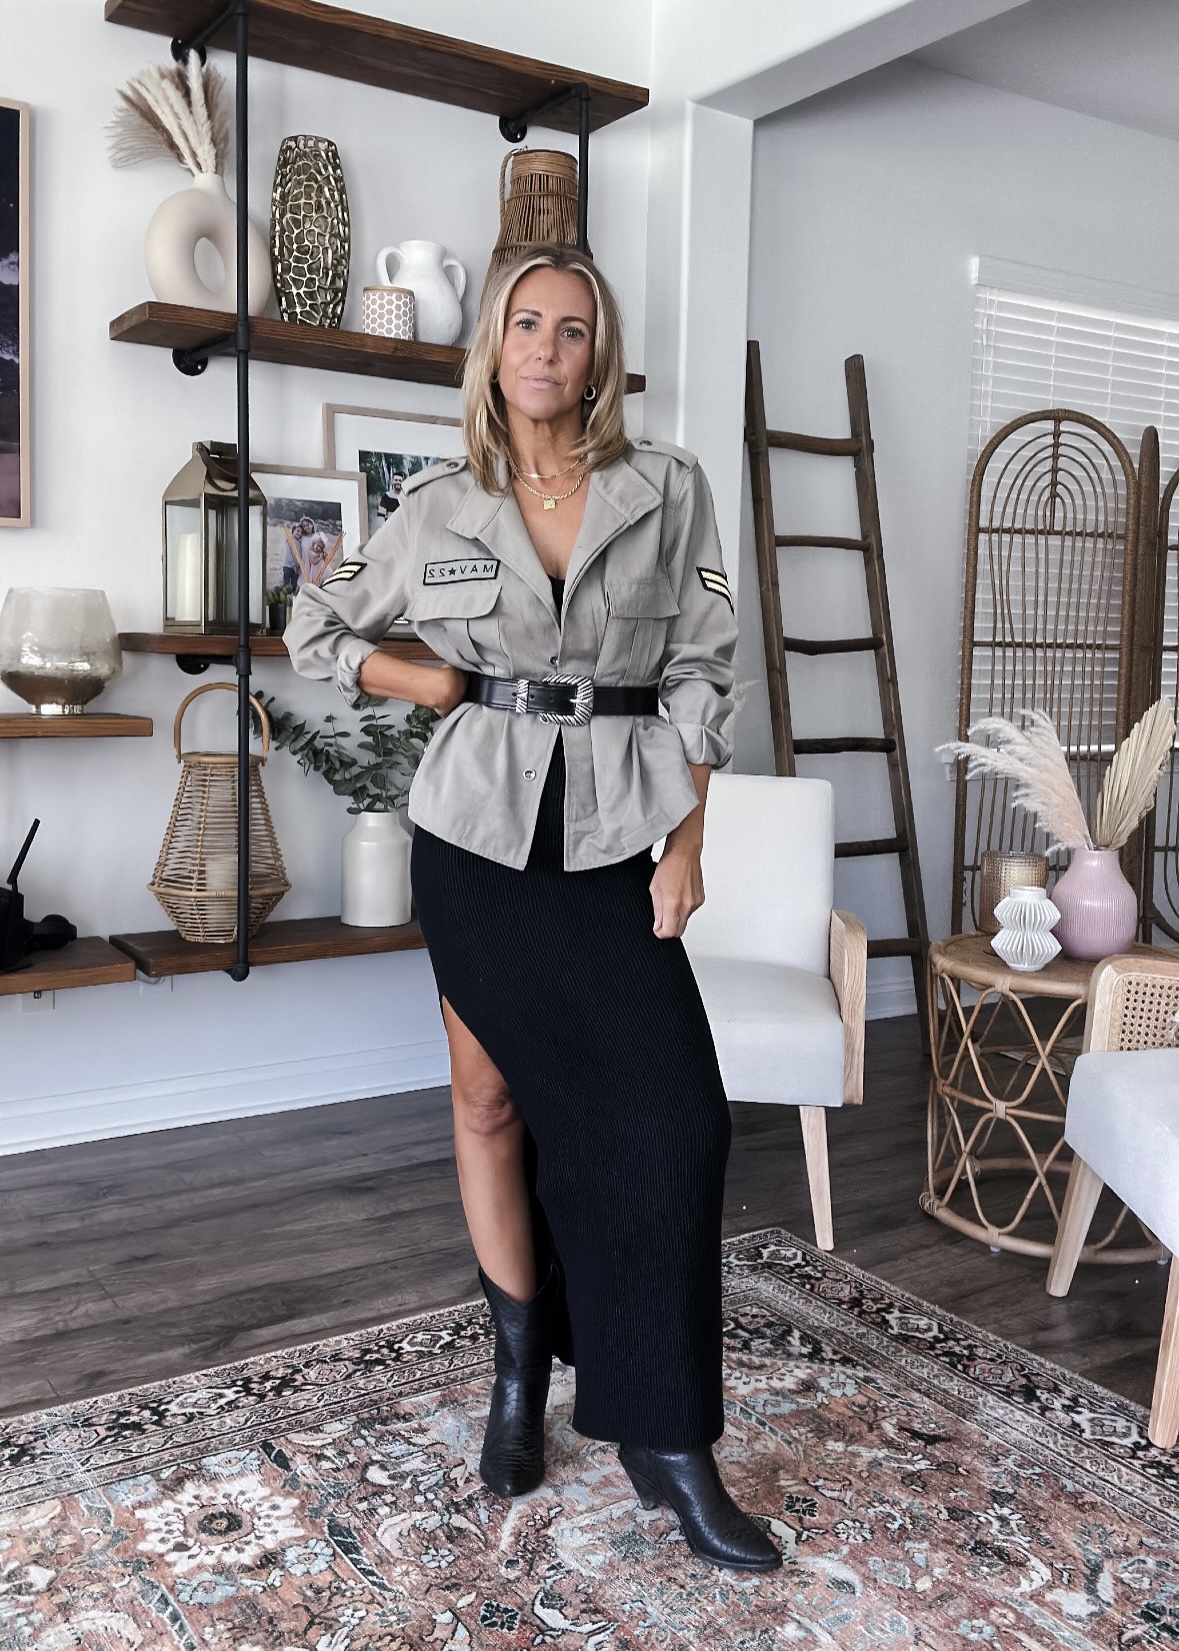 5 WAYS TO STYLE AMAZON MATCHING SET-Jaclyn De Leon style. This Amazon matching set is so chic and such amazing quality so I wanted to share 5 easy ways to style it. From casual to dressed up this set is so versatile and can be worn so many different ways.